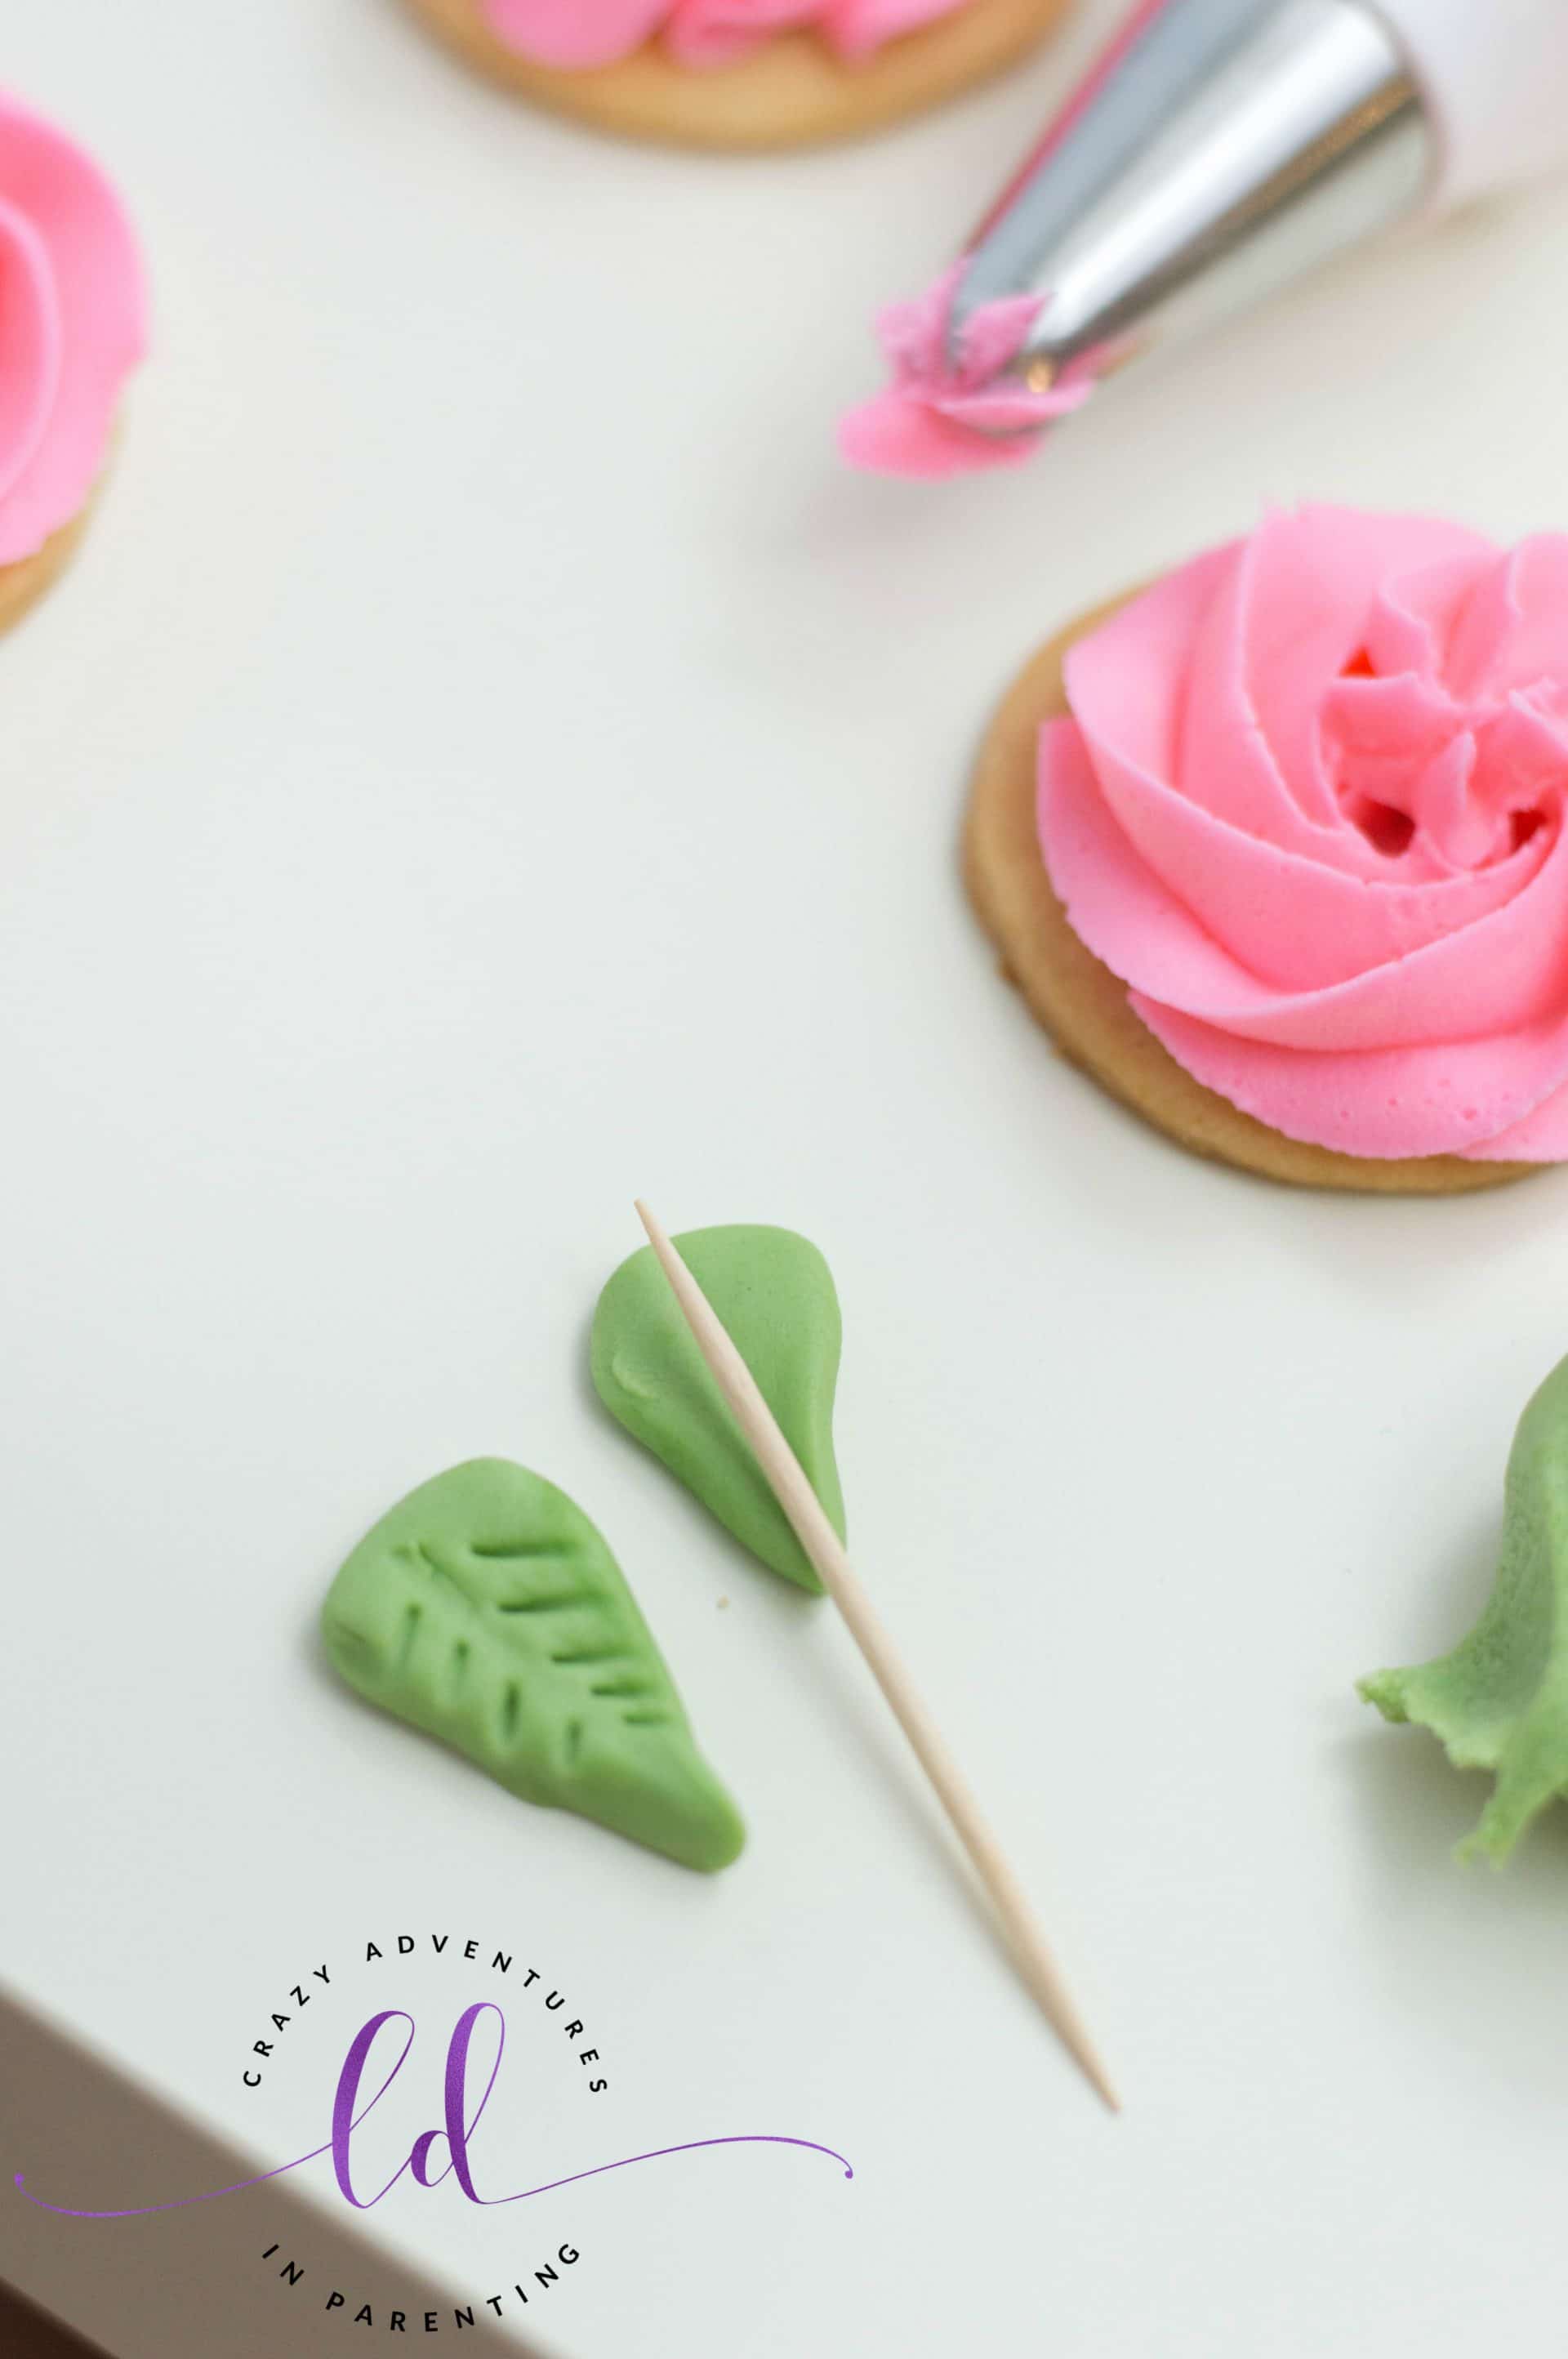 Use toothpick to score leaves for Rose Sugar Cookies